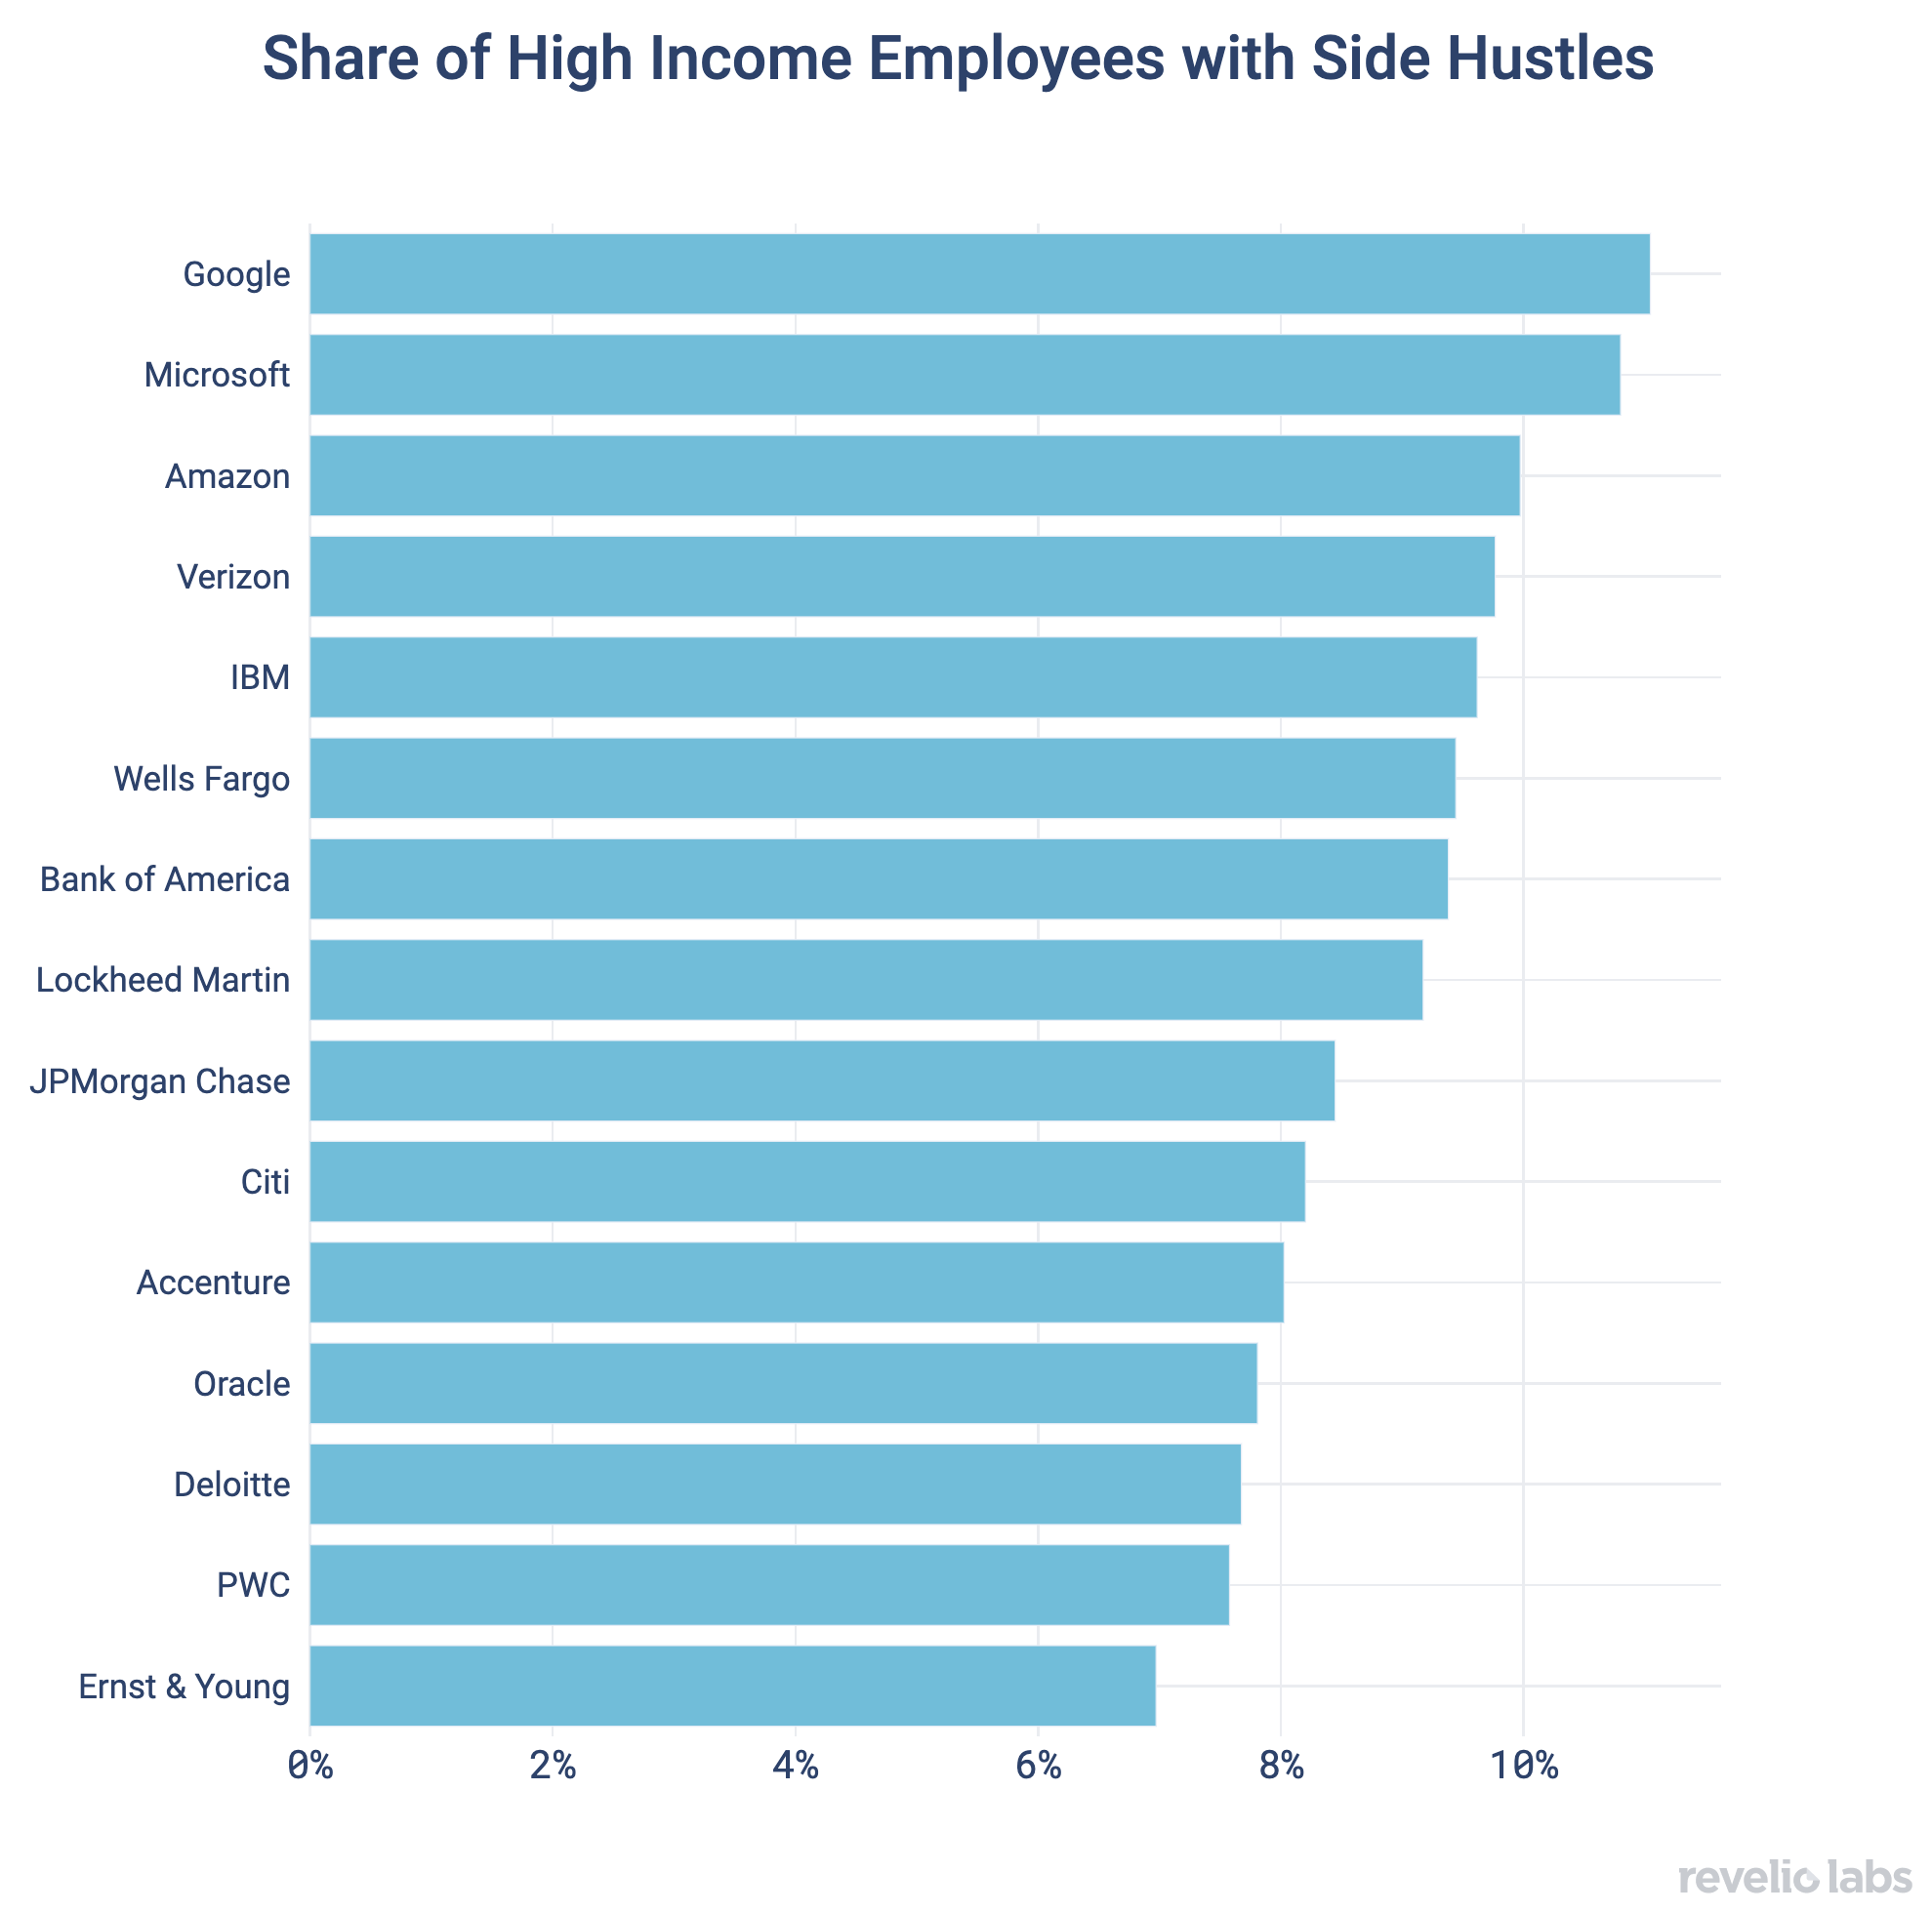 Share of High Income Employees with Side Hustles